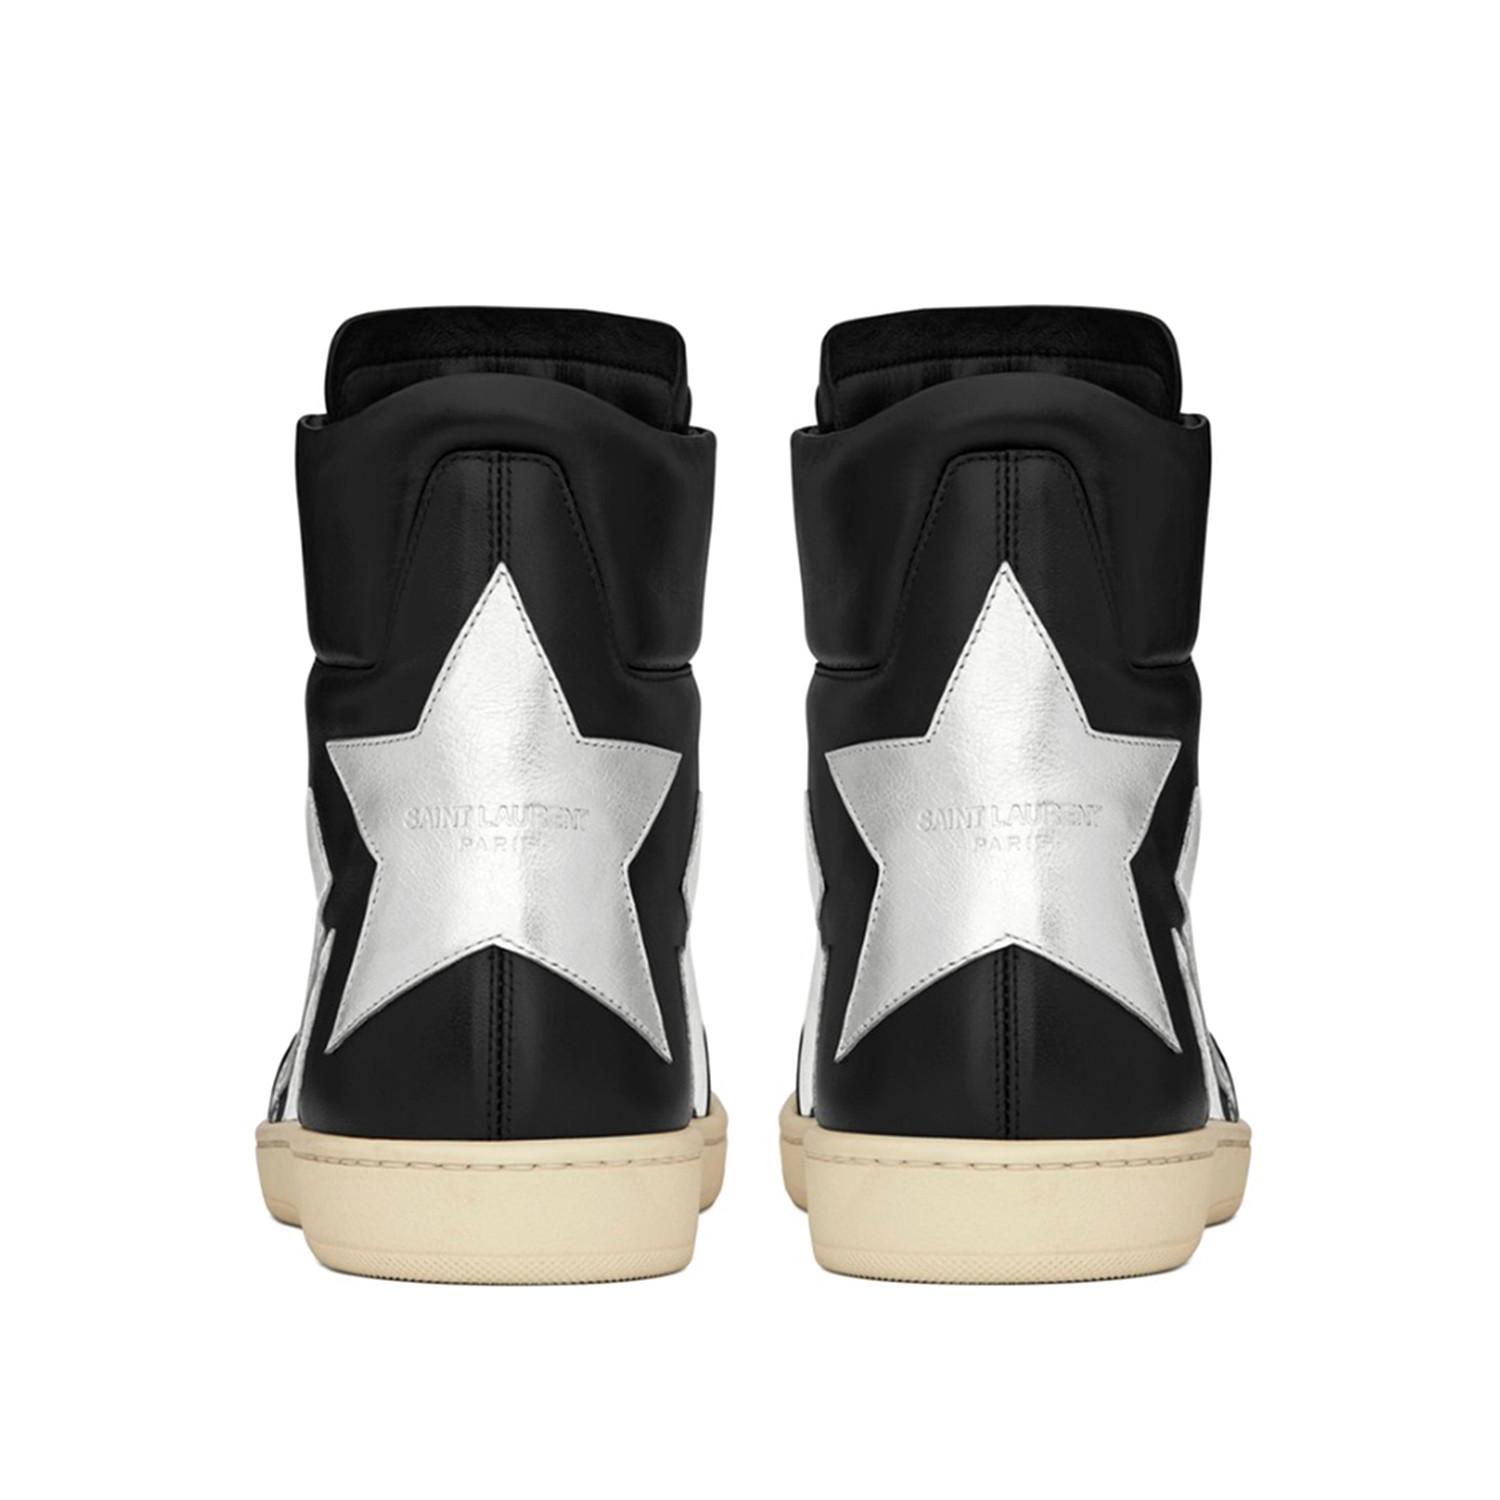 Saint Laurent // Men's Star-Back Leather High-Top Sneaker // Black + Silver  (Euro: 43.5) - Luxury Fashion - Touch of Modern